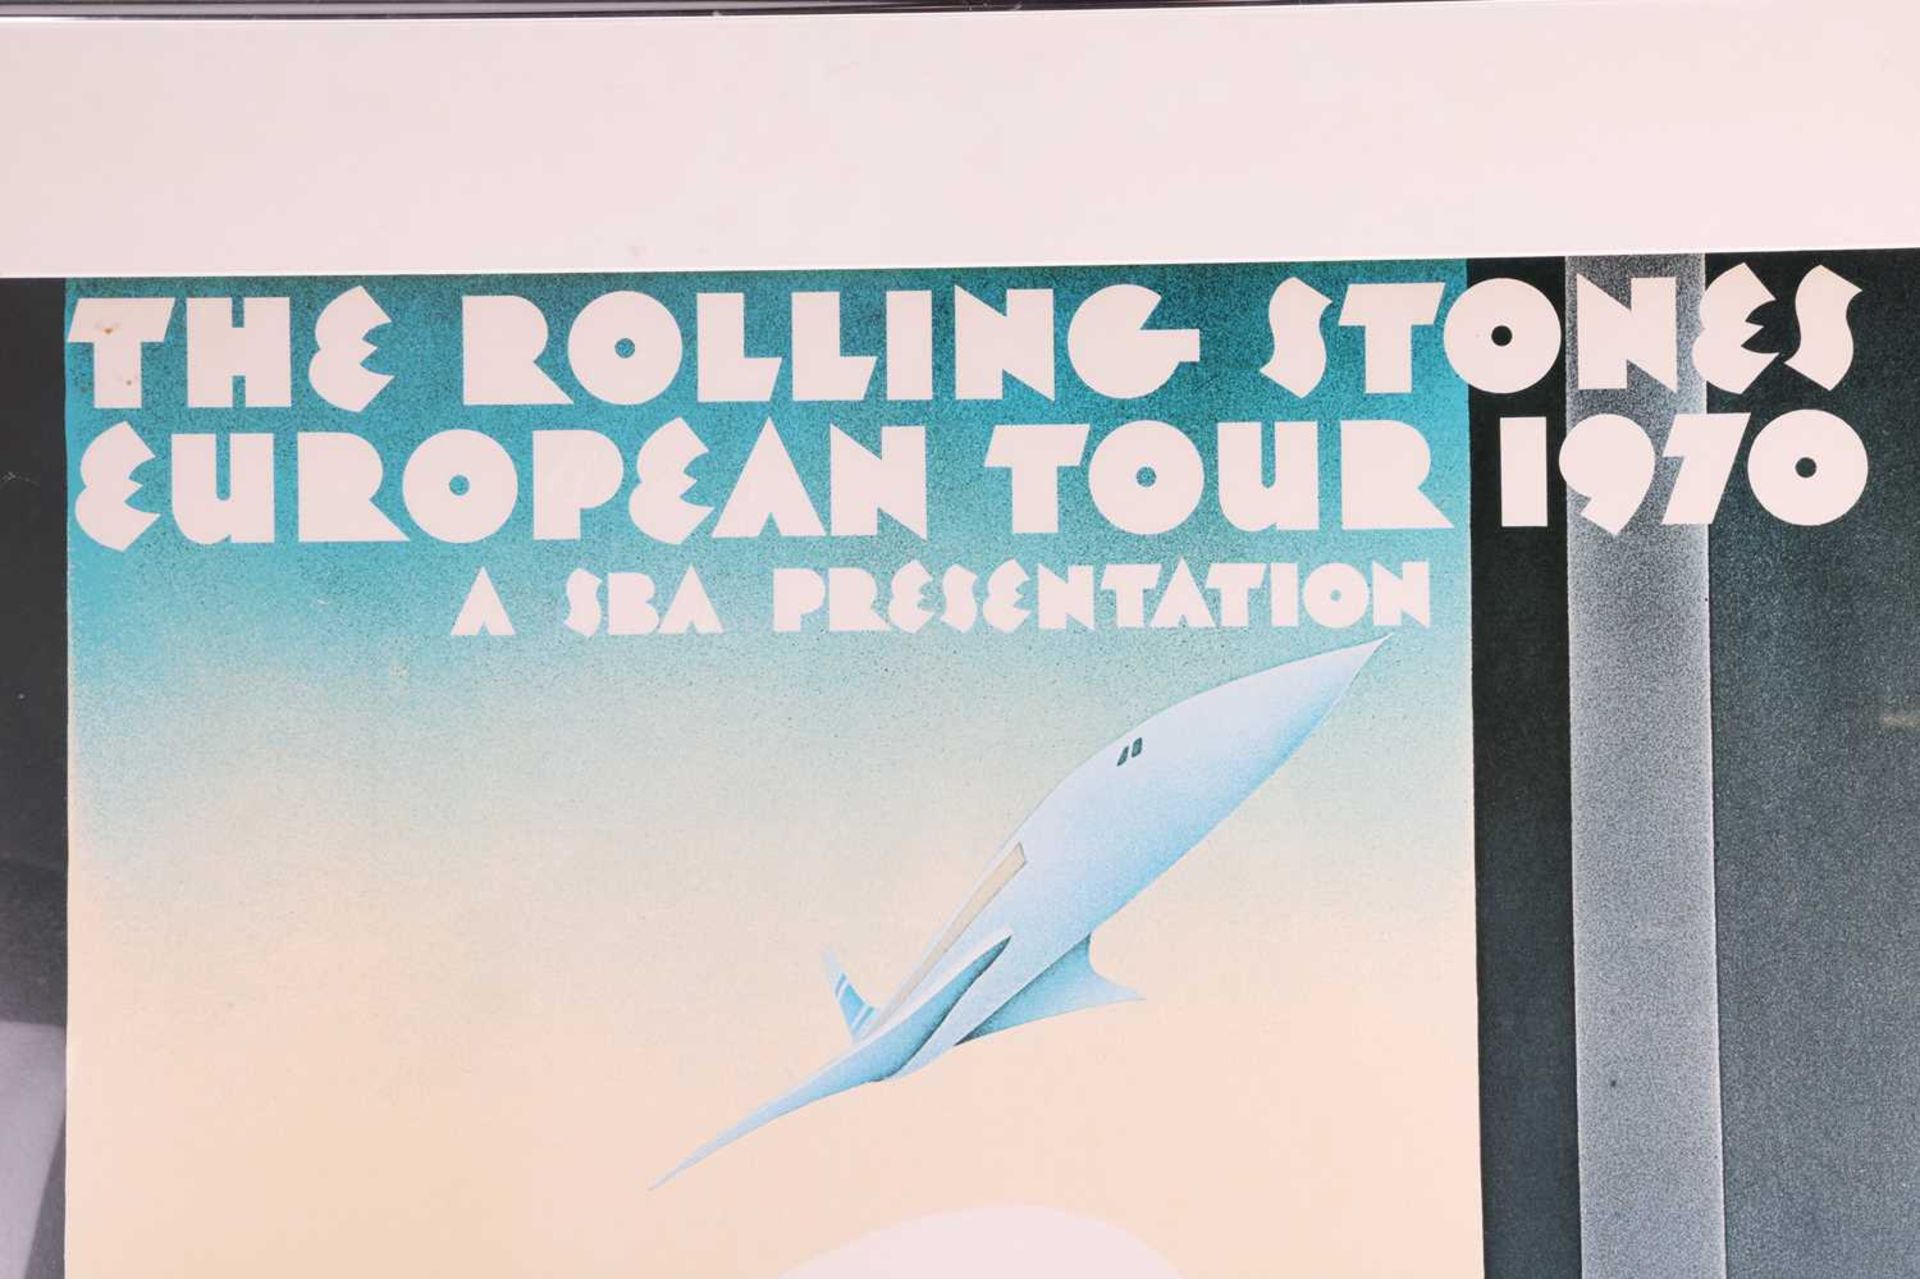 The Rolling Stones: a European Tour poster, 1970, designed by John Pasche, framed and glazed, the fr - Image 8 of 9